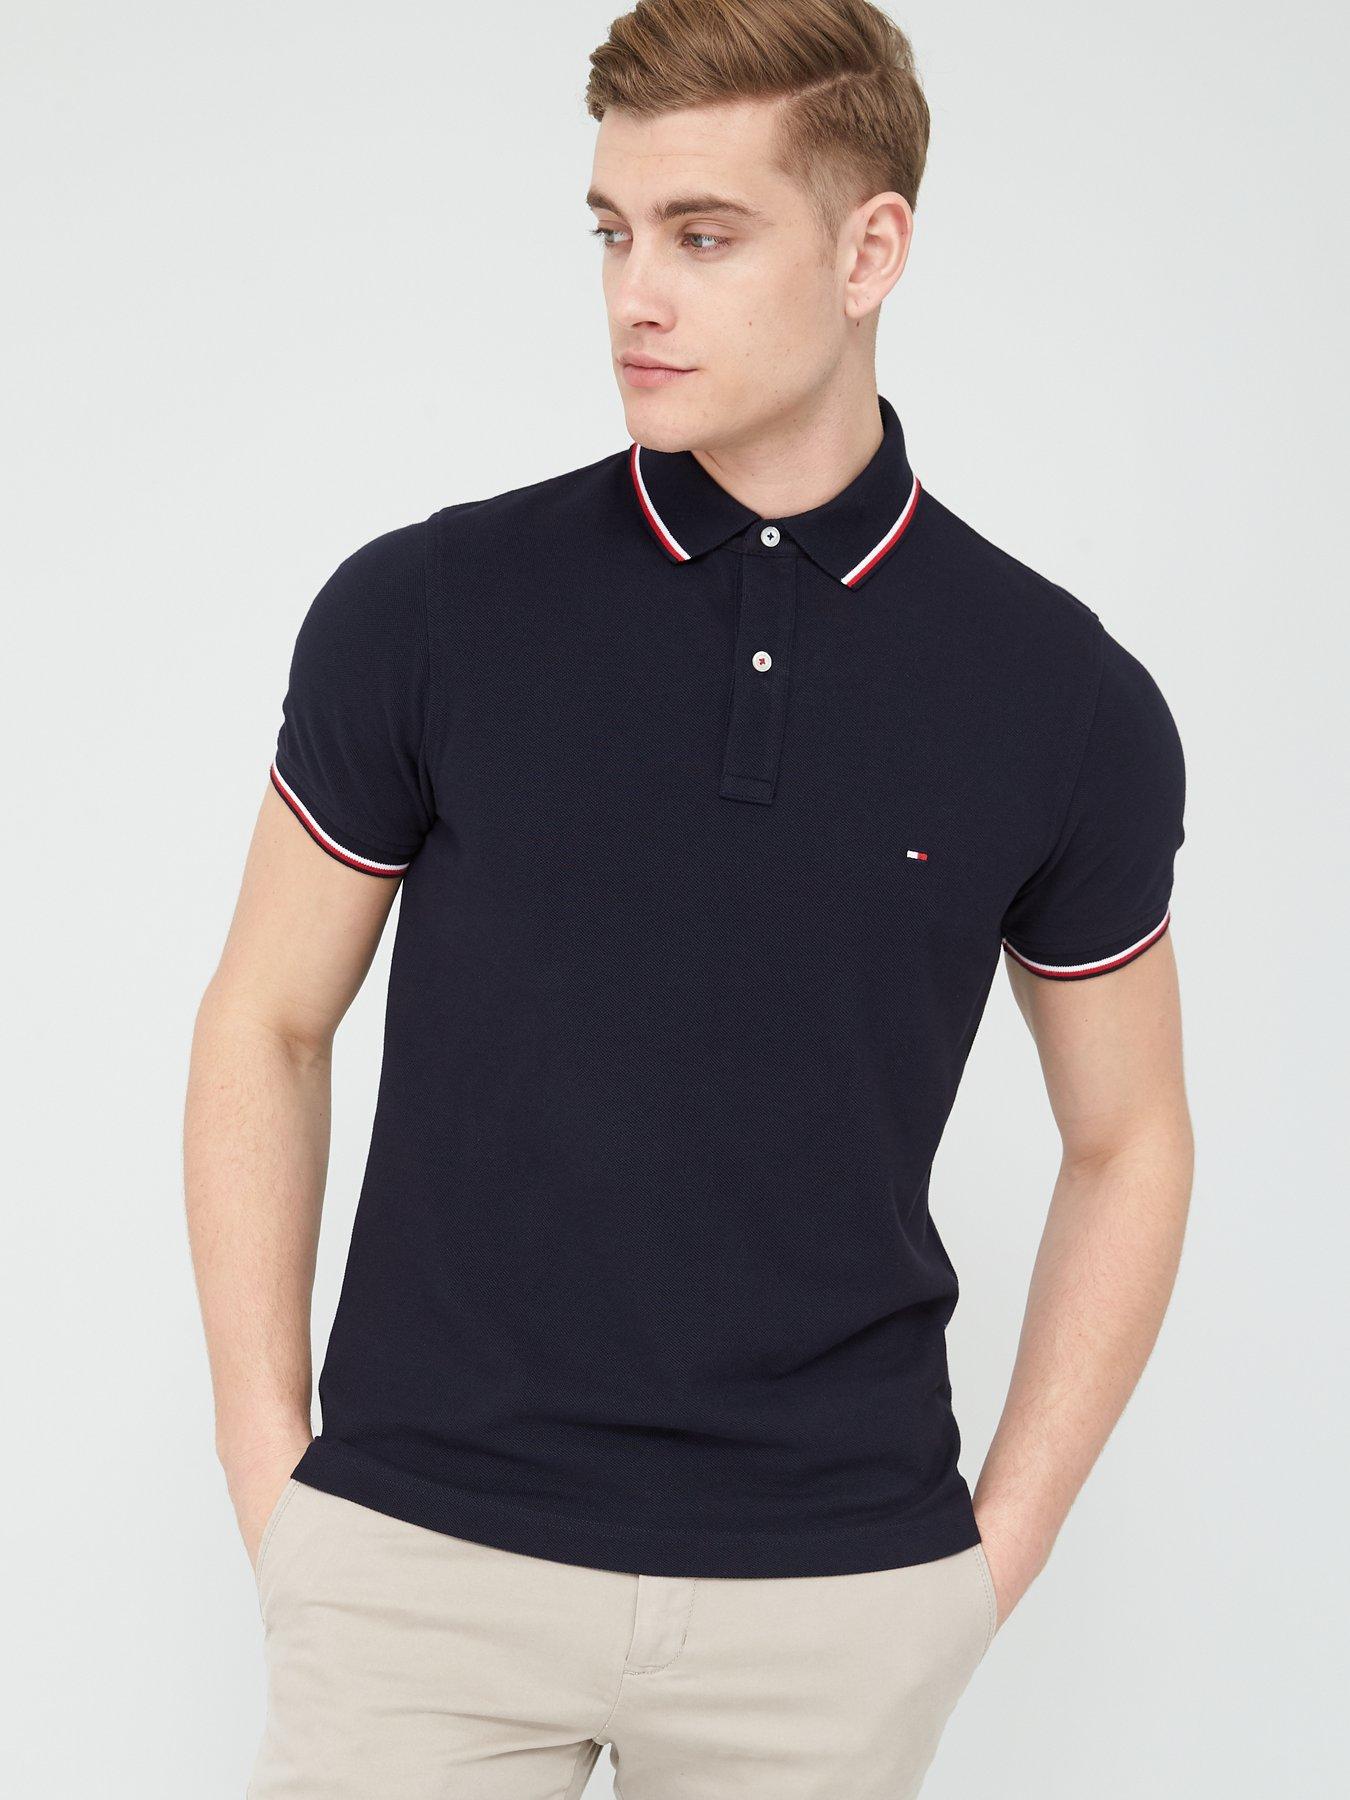 Tommy Hilfiger Tipped Slim Fit Polo Shirt - Desert Sky Navy | very.co.uk